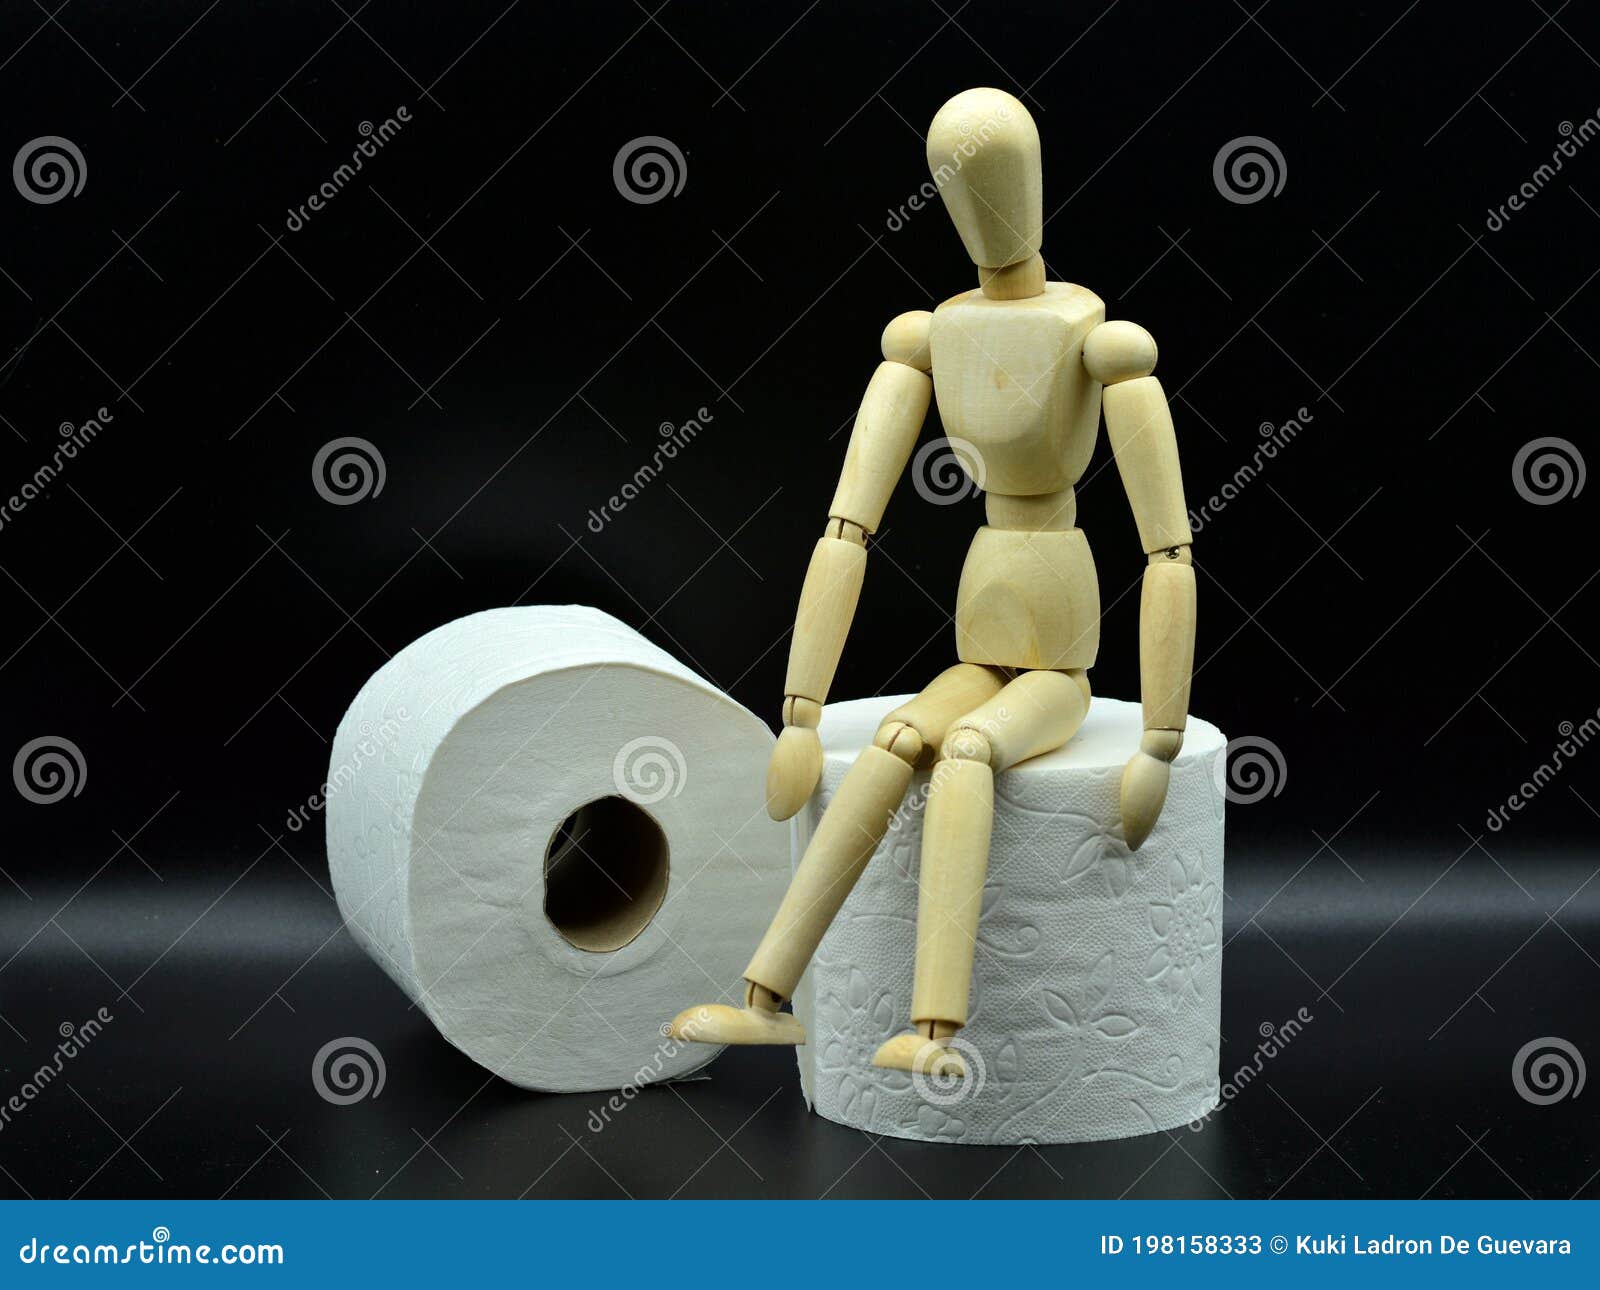 wooden mannequin sitting on a roll of toilet paper